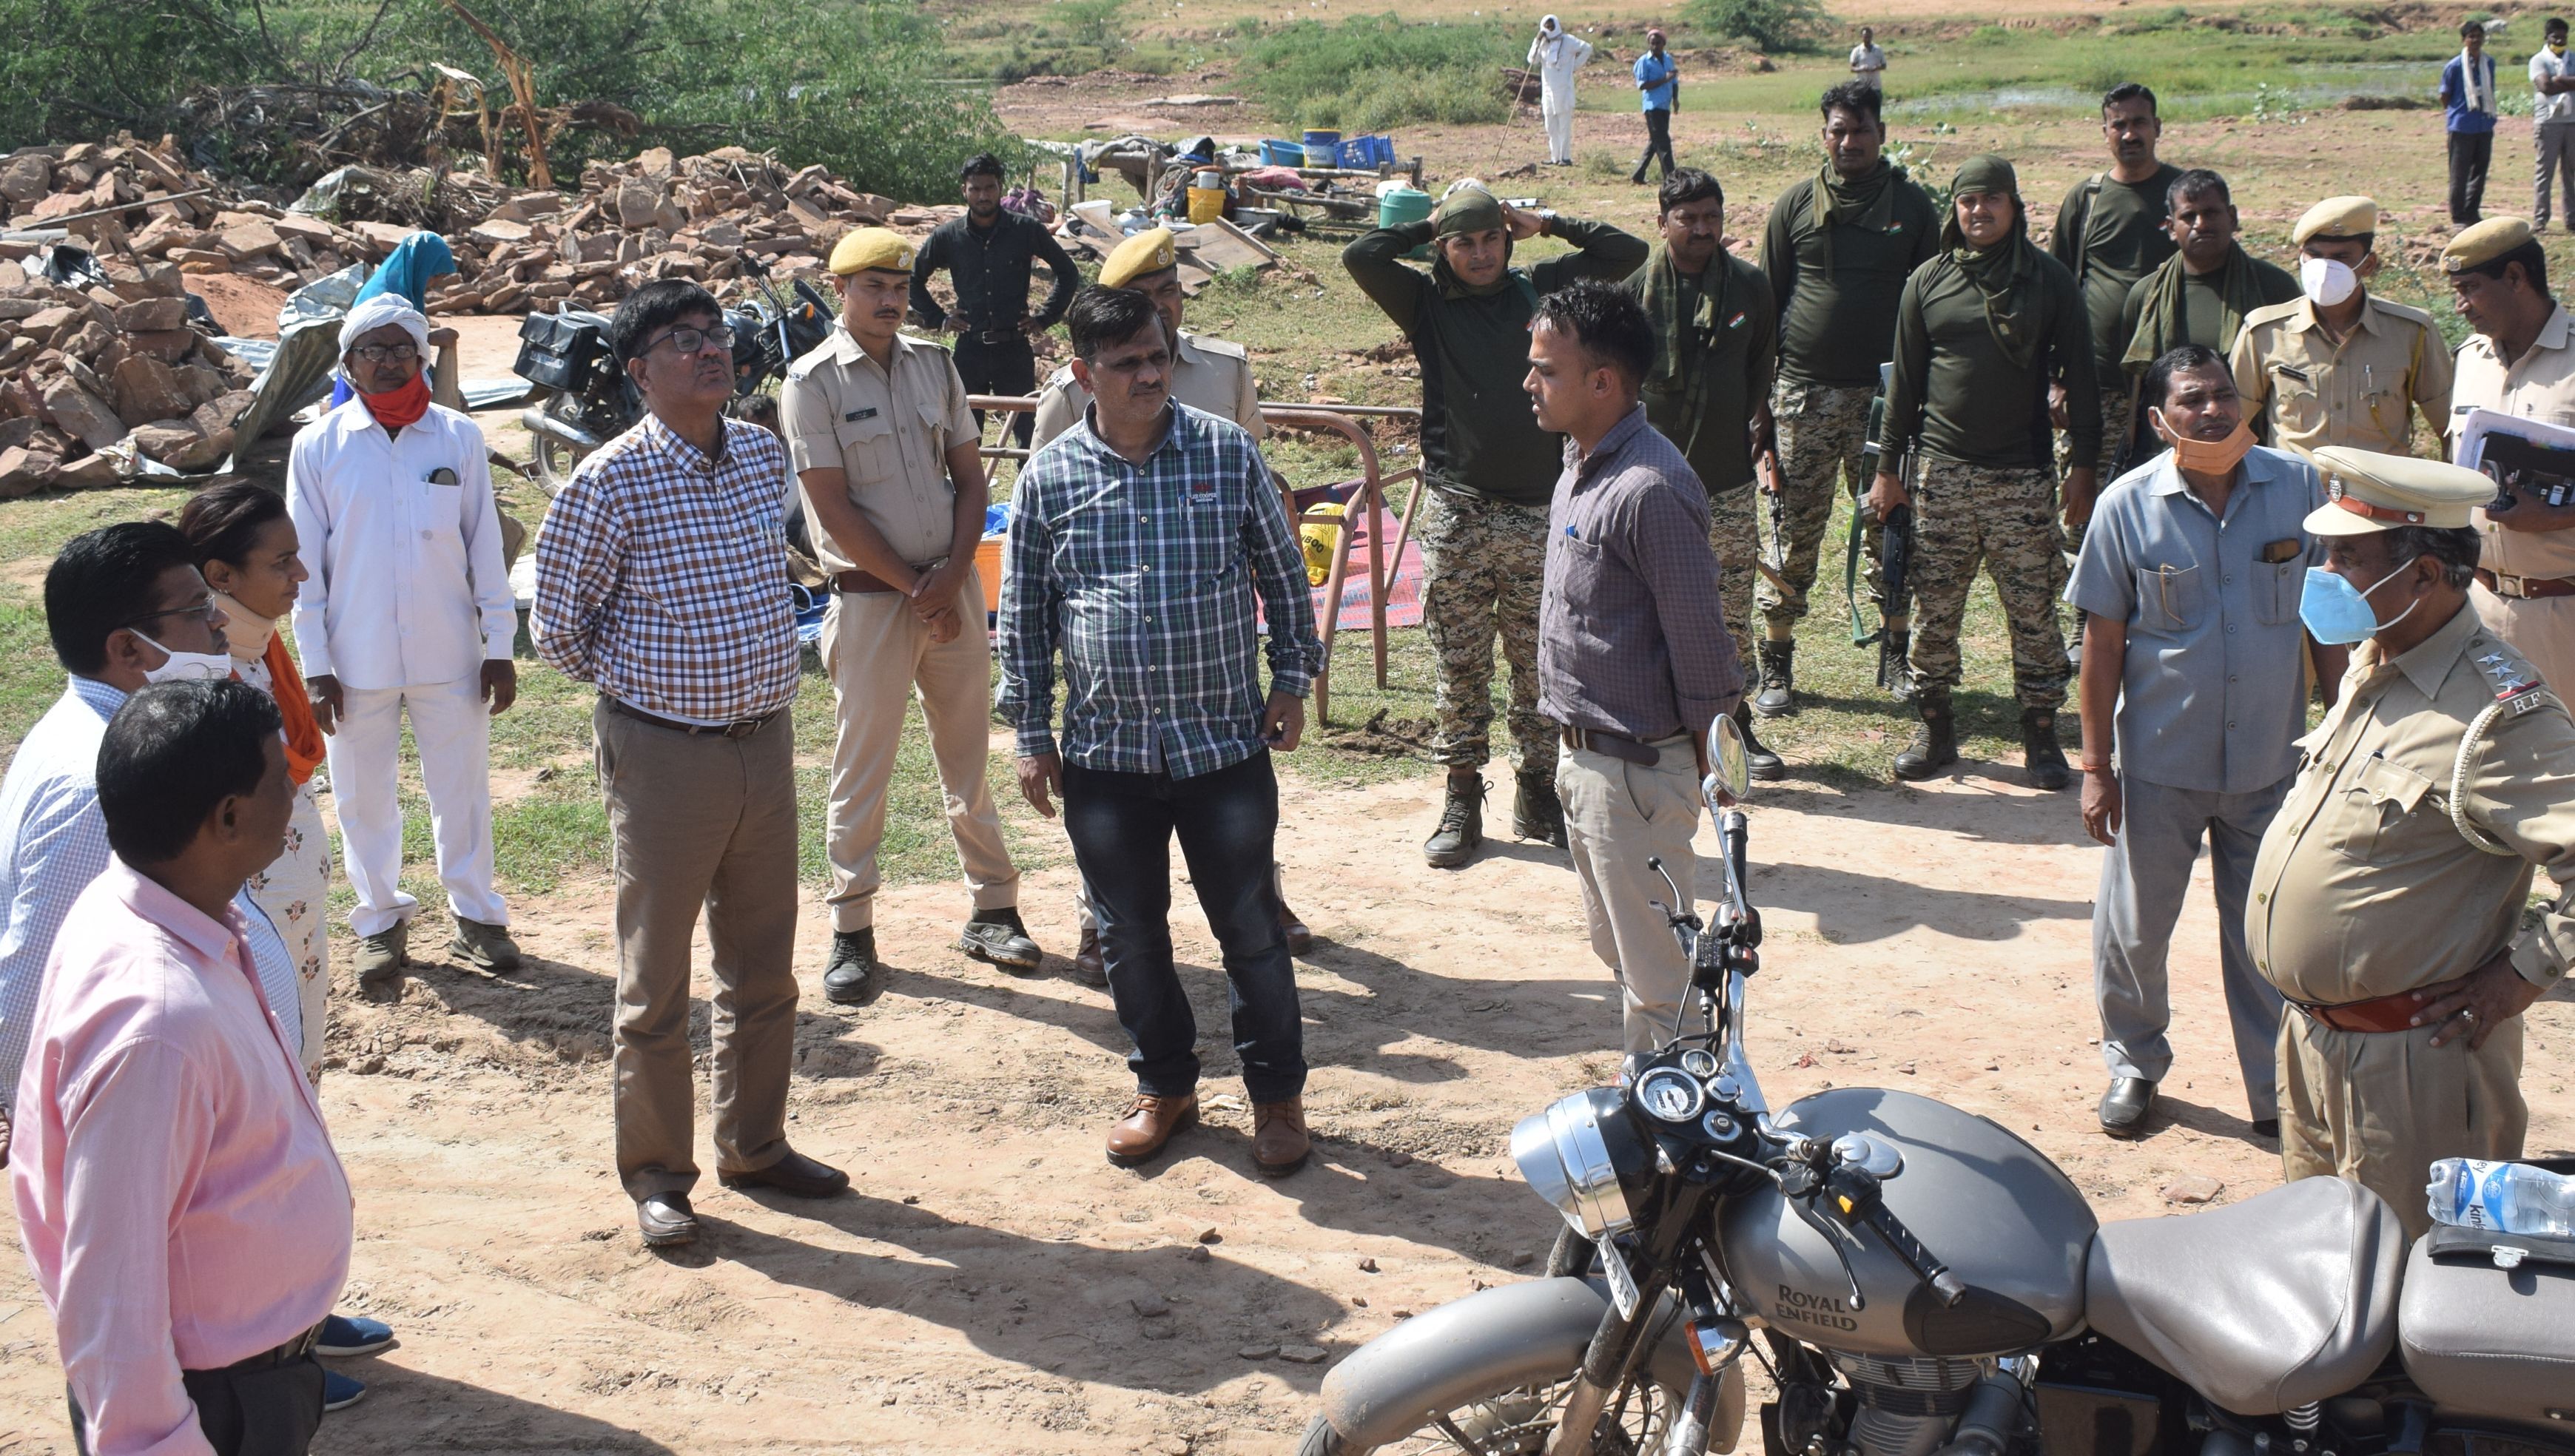 Illegal mining was encroaching on government pasture land, exploded bhanda